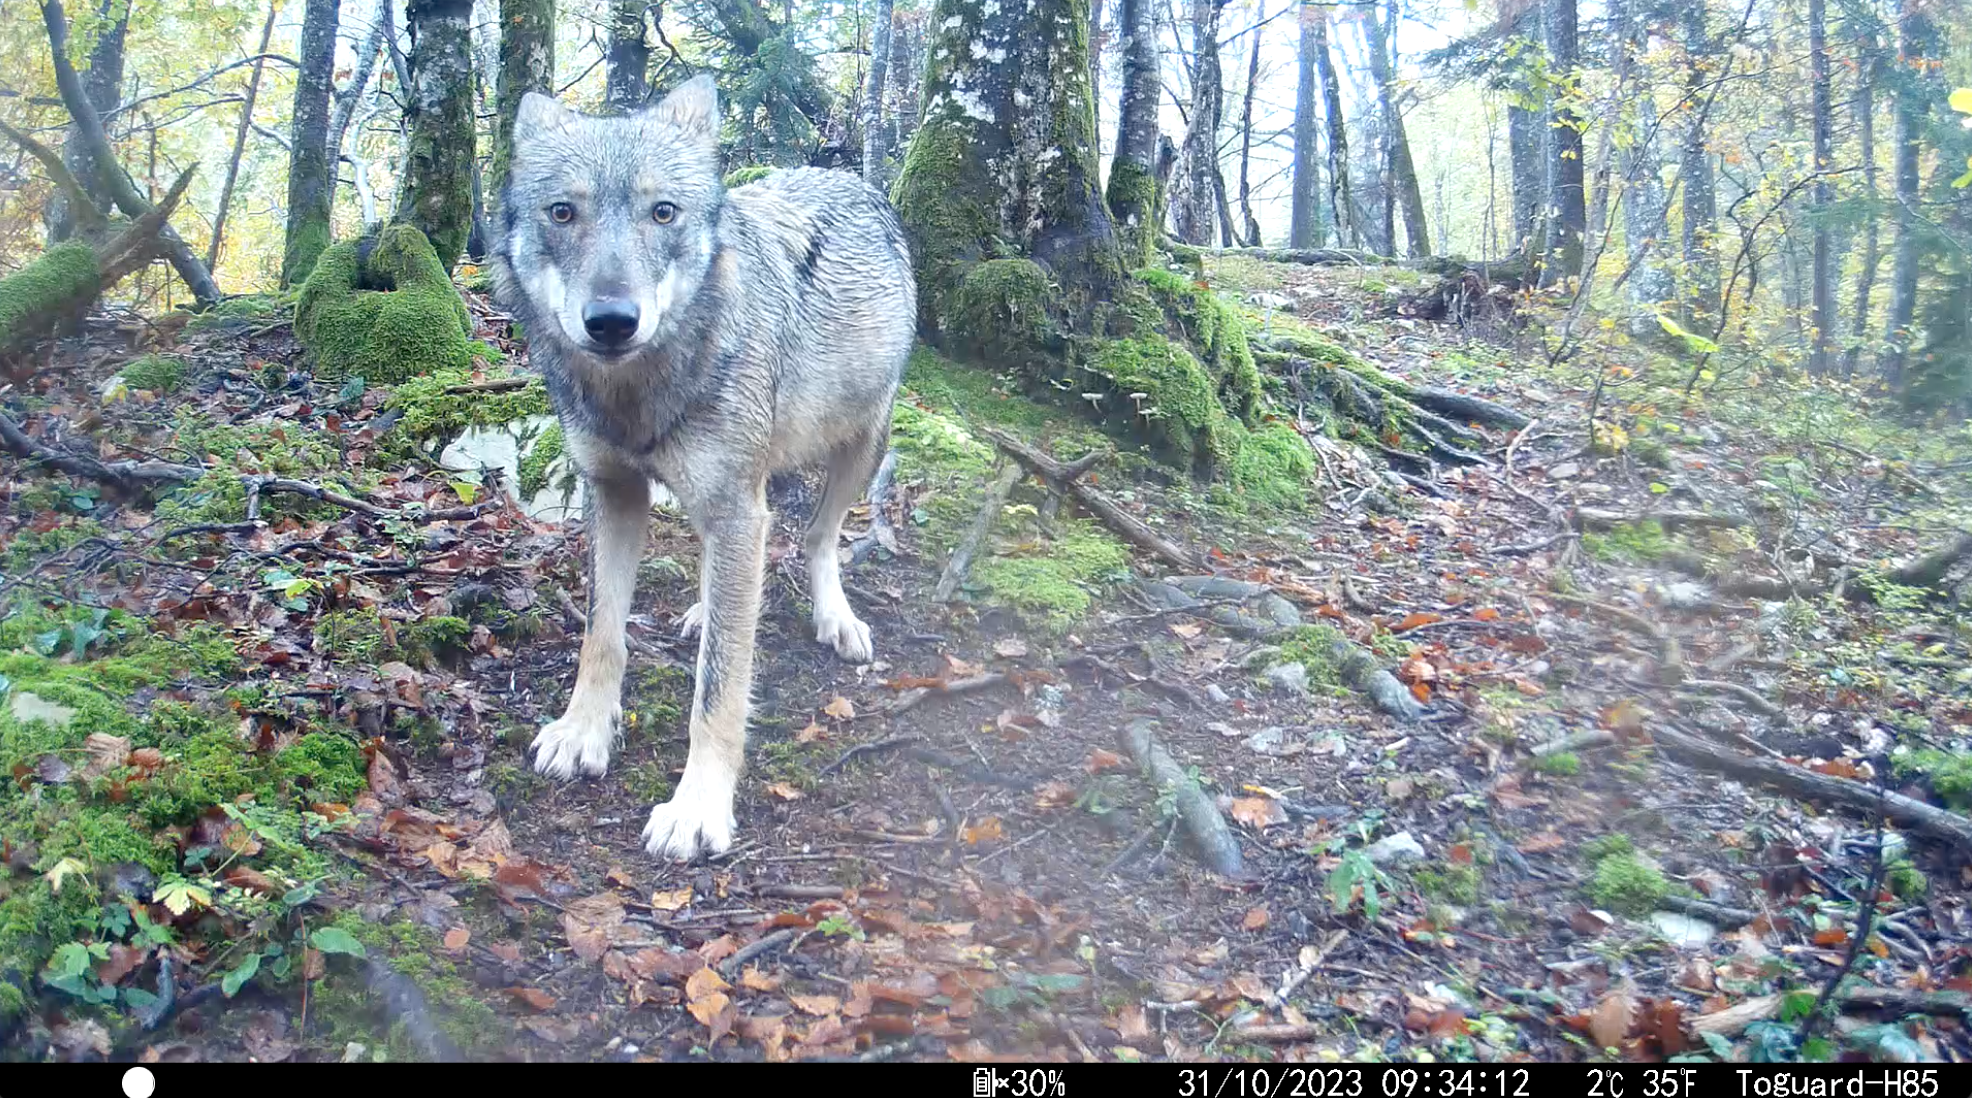 Young wolf captured on a wildlife camera in Switzerland, Oct. 31, 2023 © Marco Lambertini